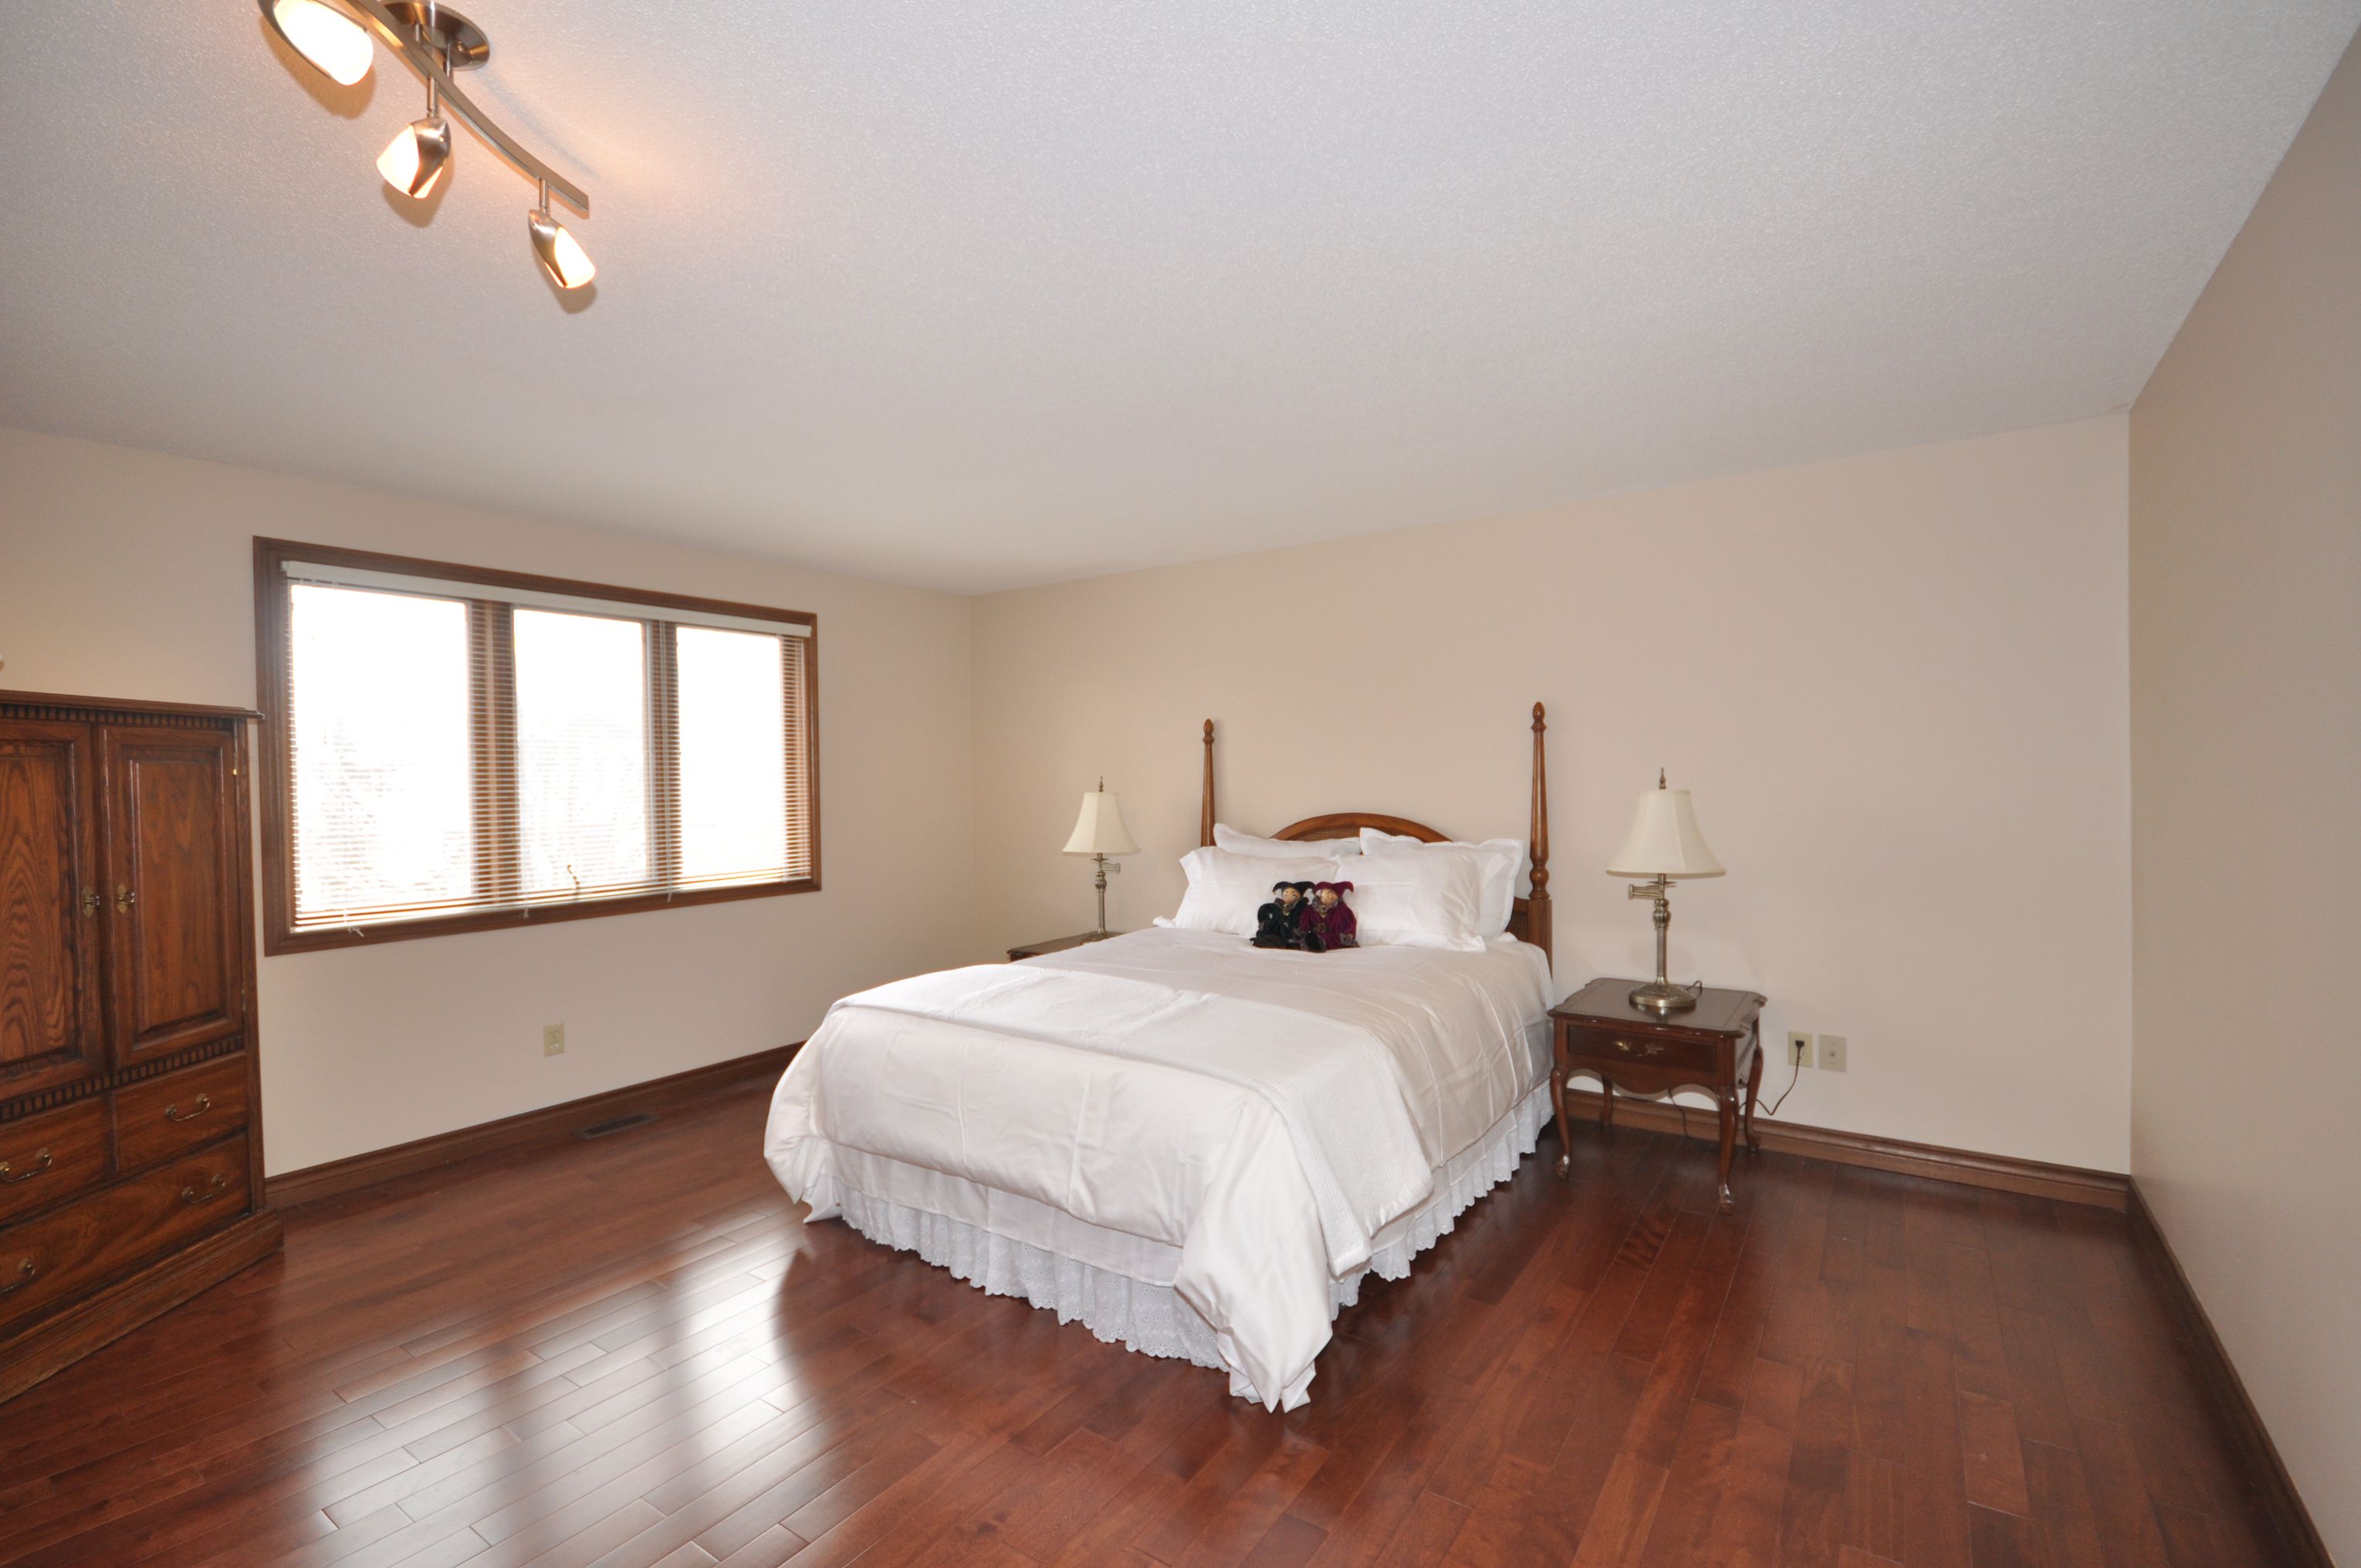 4 nice sized Bedrooms all with hardwood floors